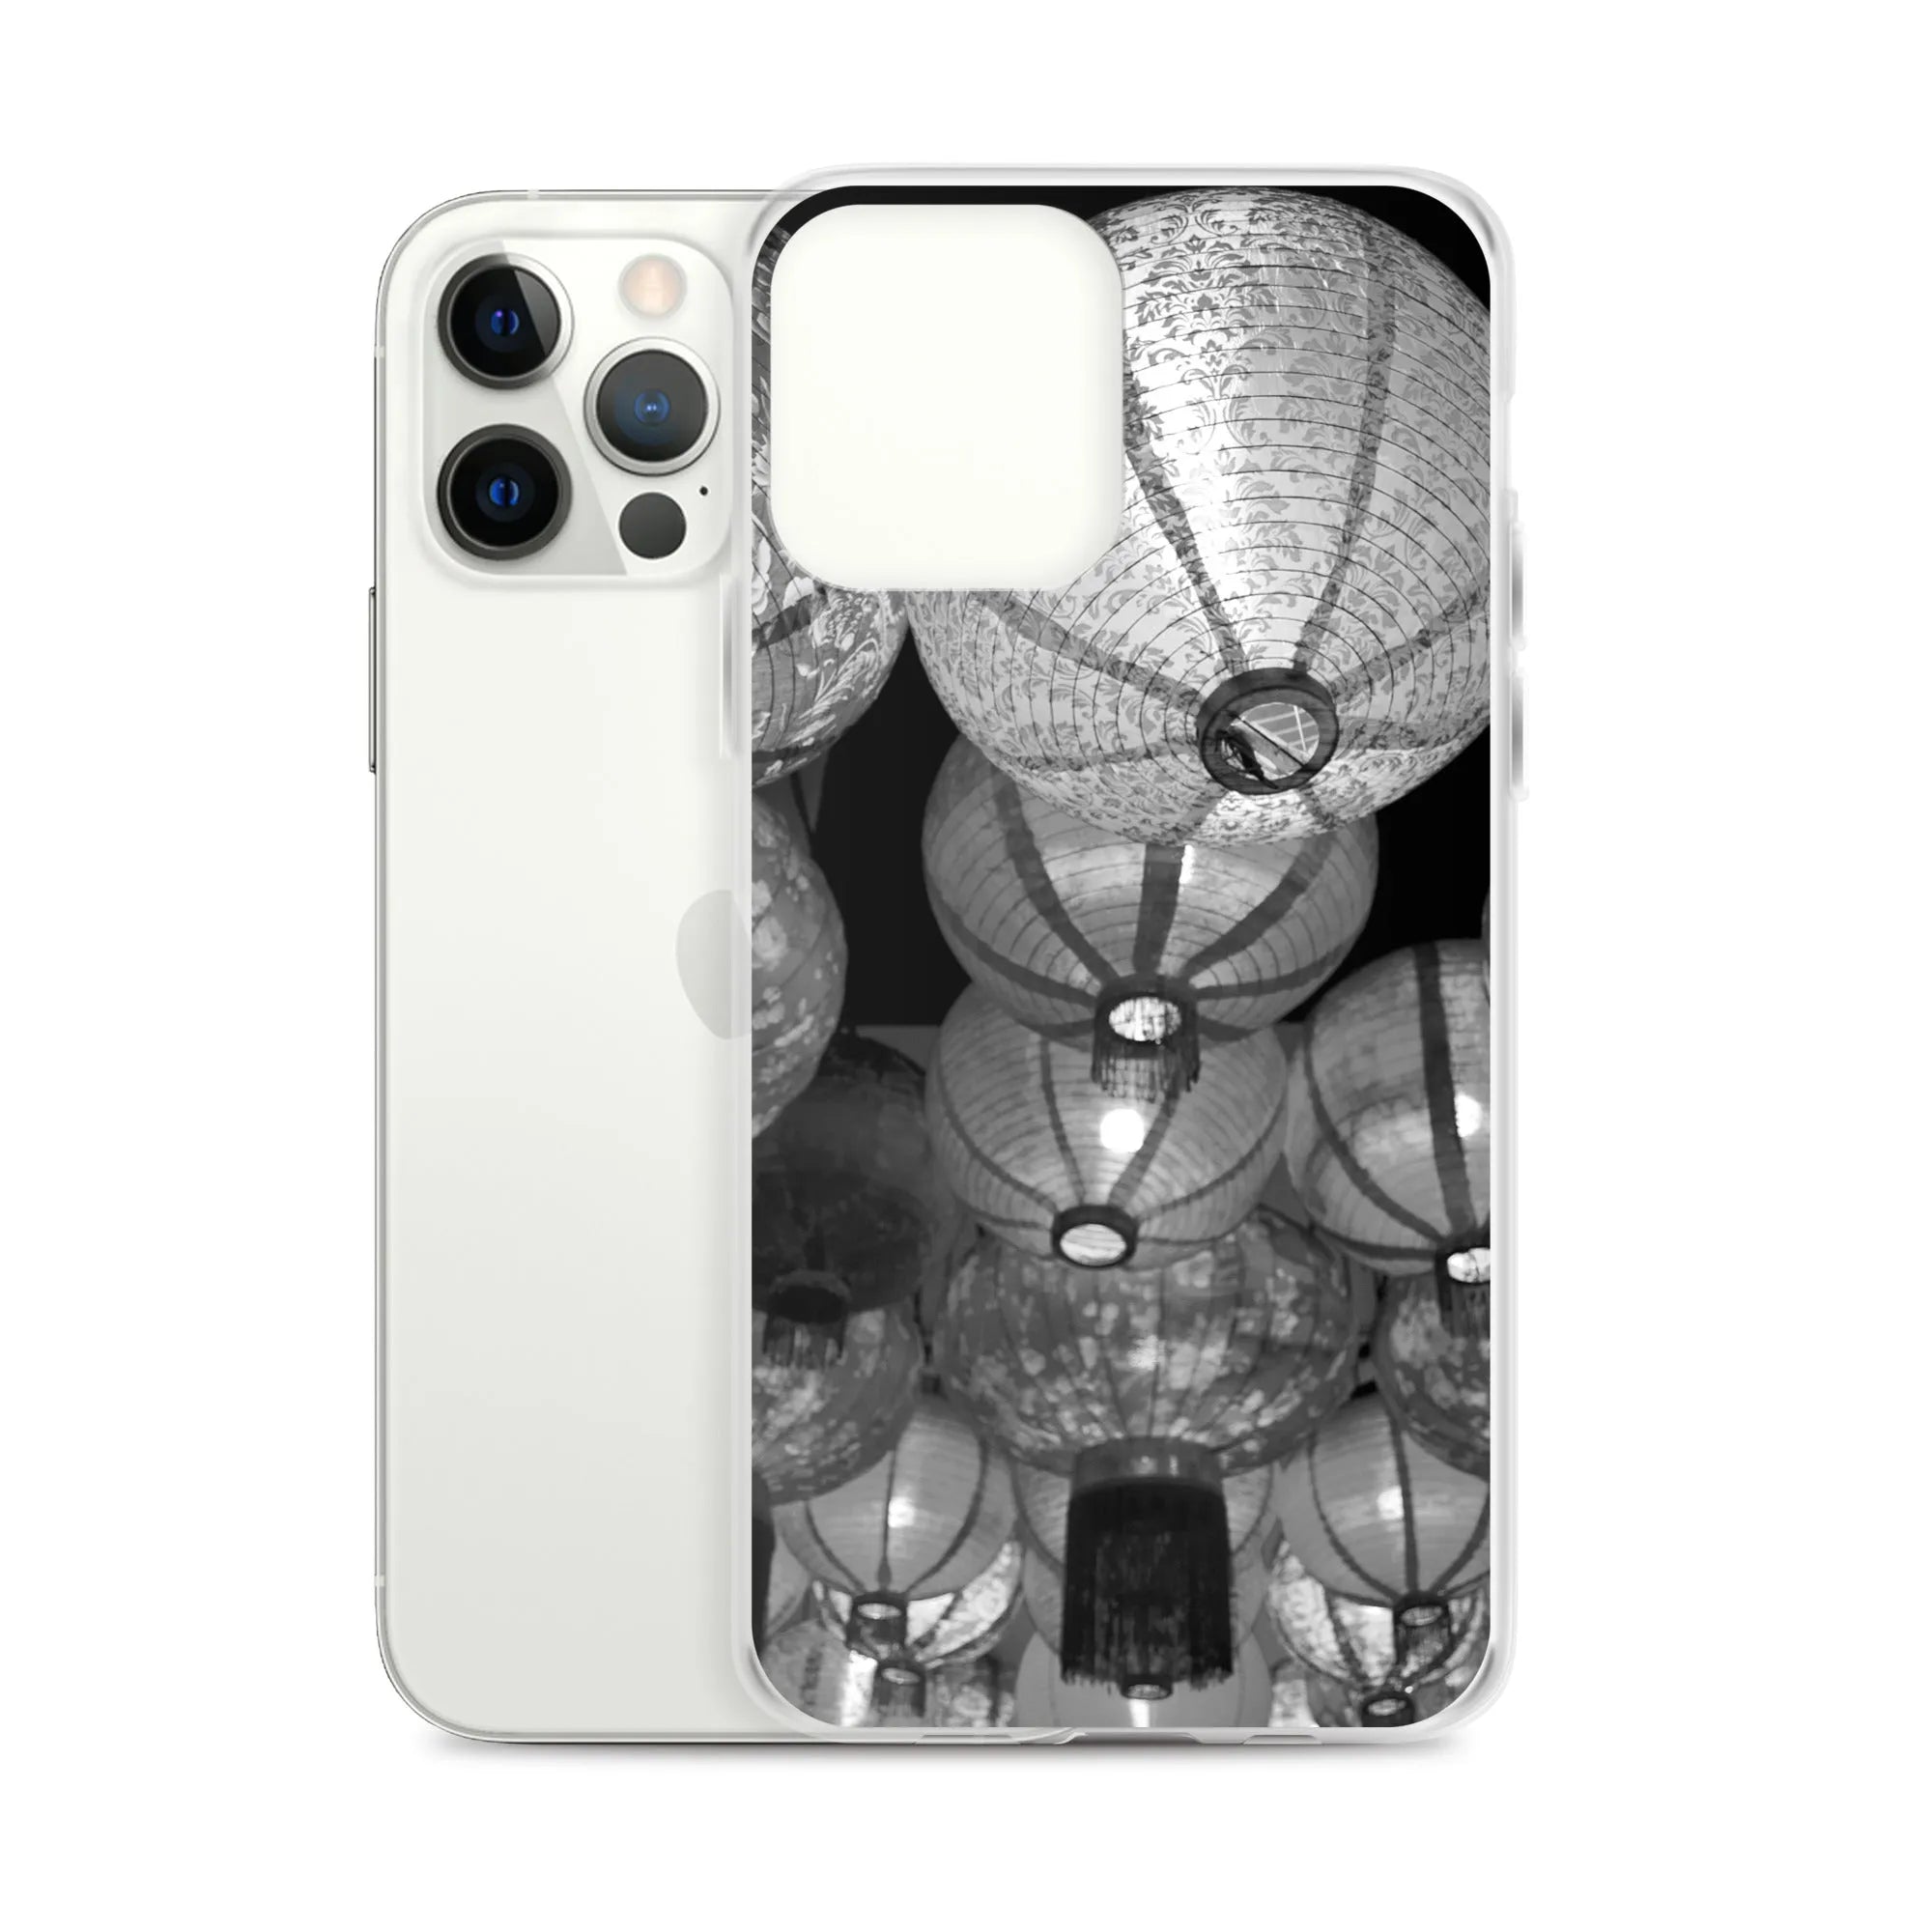 Raise The Red Lanterns - Designer Travels Art Iphone Case - Black And White - Iphone 12 Pro Max - Mobile Phone Cases